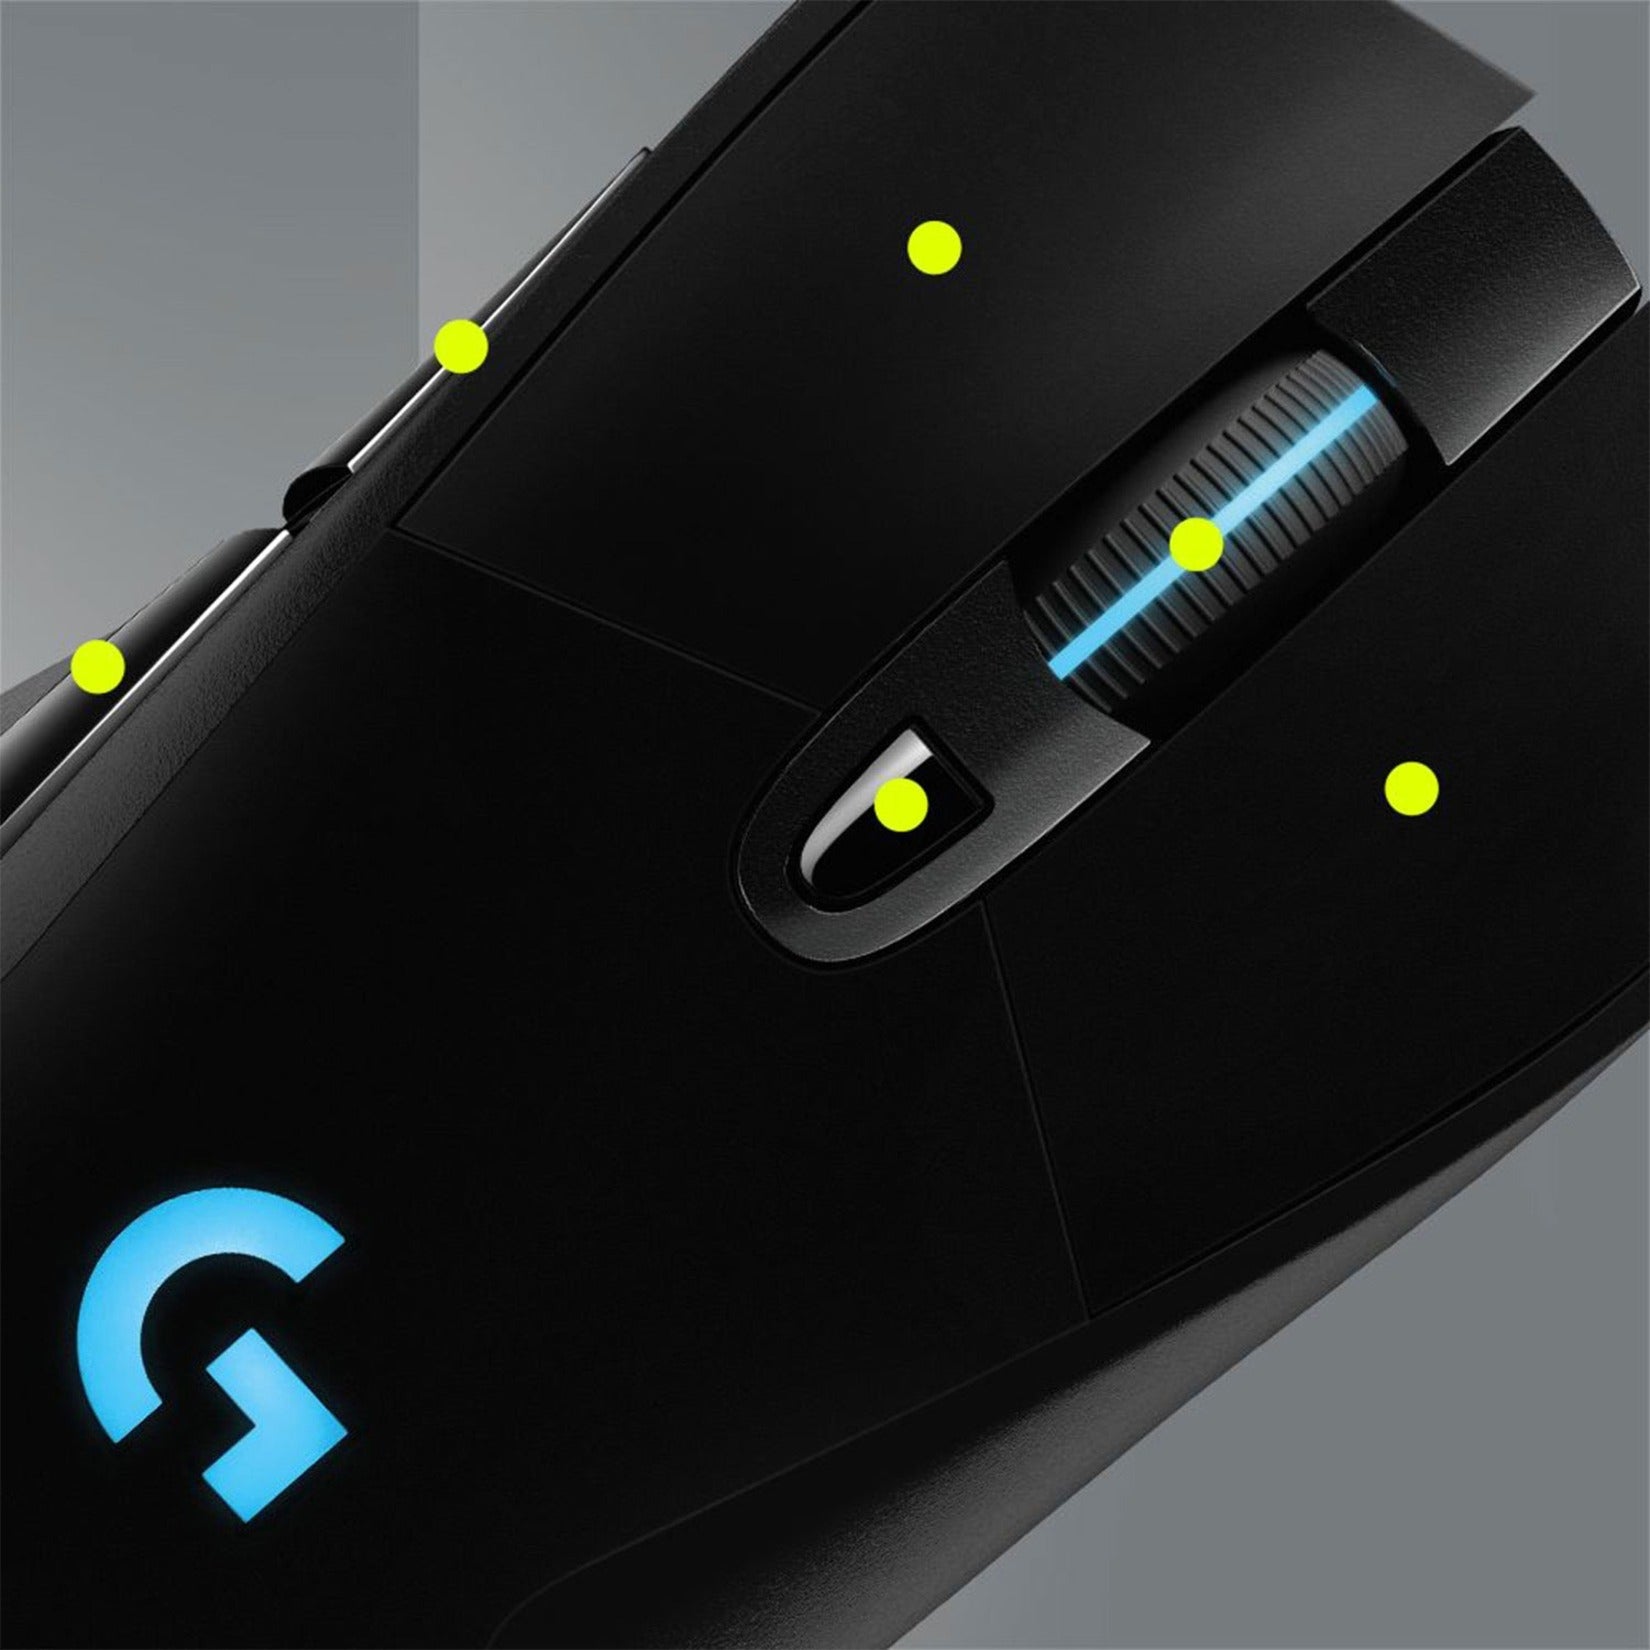 Logitech G703 – Hardware and Game Gear Reviews